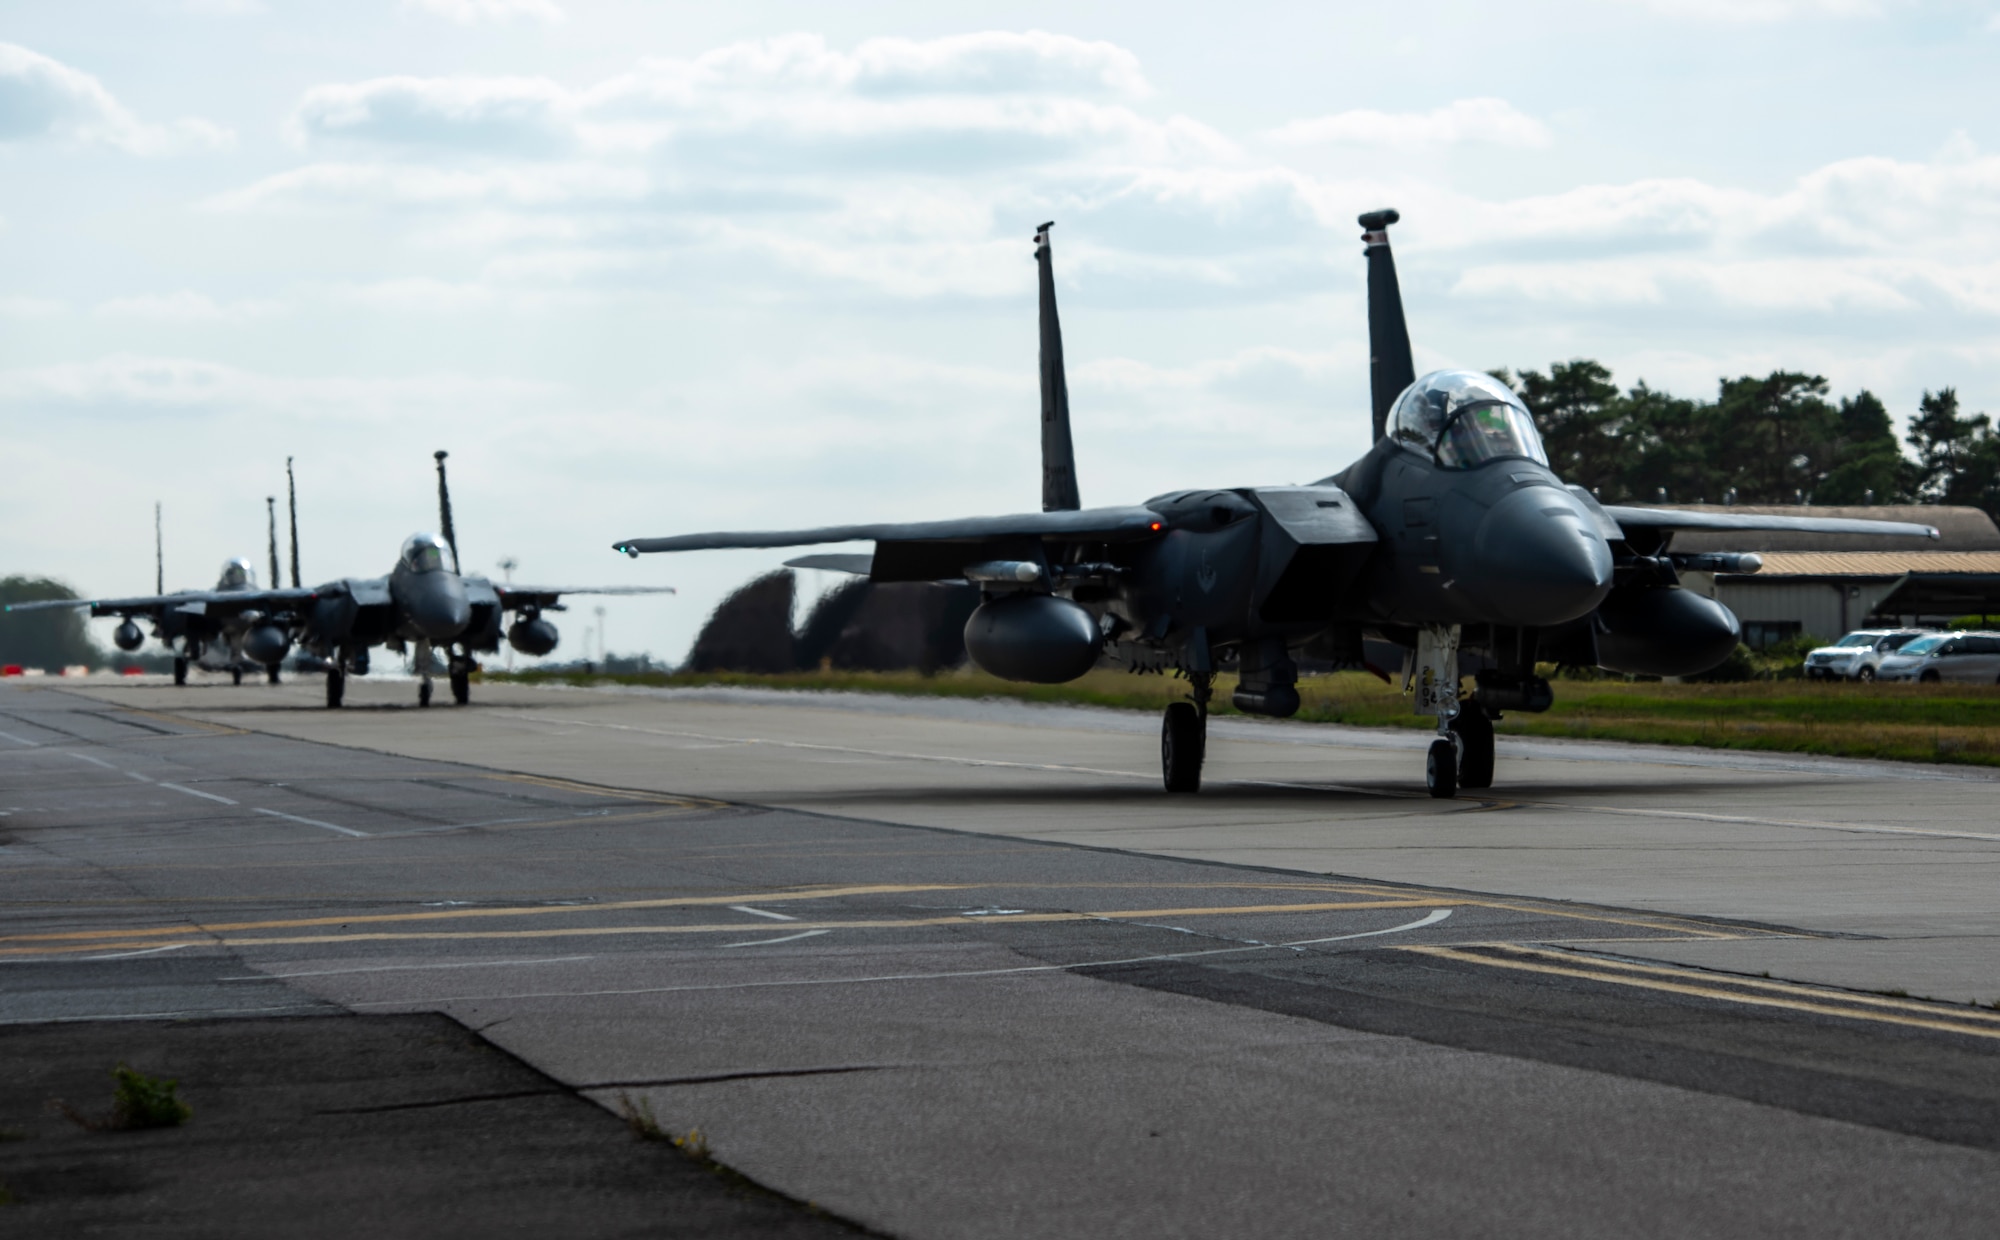 F-15E Strike Eagles assigned to the 48th Fighter Wing taxi down the flightline prior to takeoffs in support of exercise Point Blank 20-4 at Royal Air Force Lakenheath, England, Sept. 10, 2020.  Exercises like Point Blank increase interoperability and collective readiness with other NATO forces, deter potential adversaries and ensure the skies above the European theater remain sovereign. (U.S. Air Force photo by Airman 1st Class Jessi Monte)